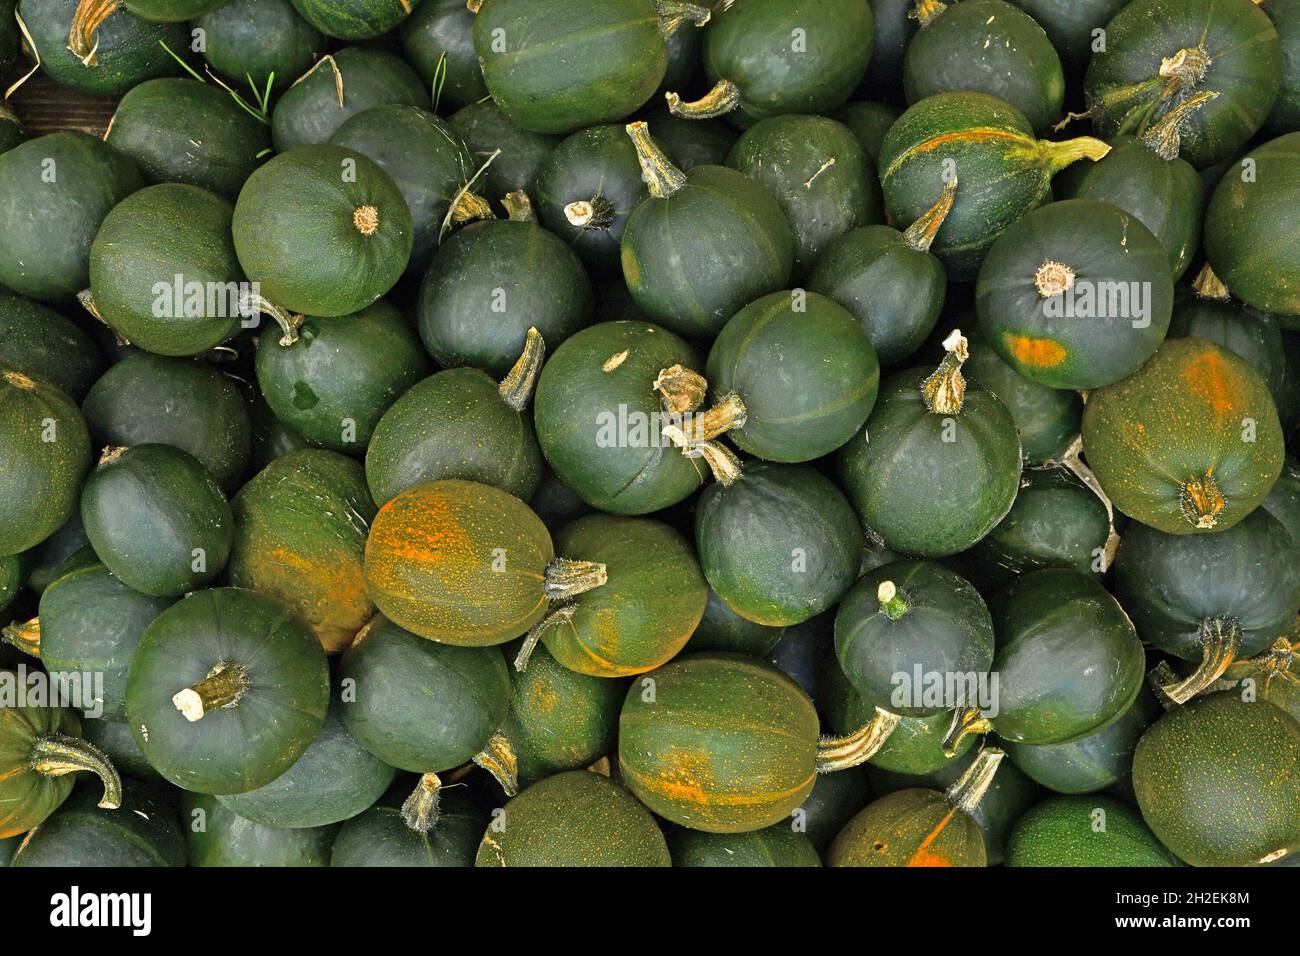 Top view of many small green Rondini Gem squashes Stock Photo